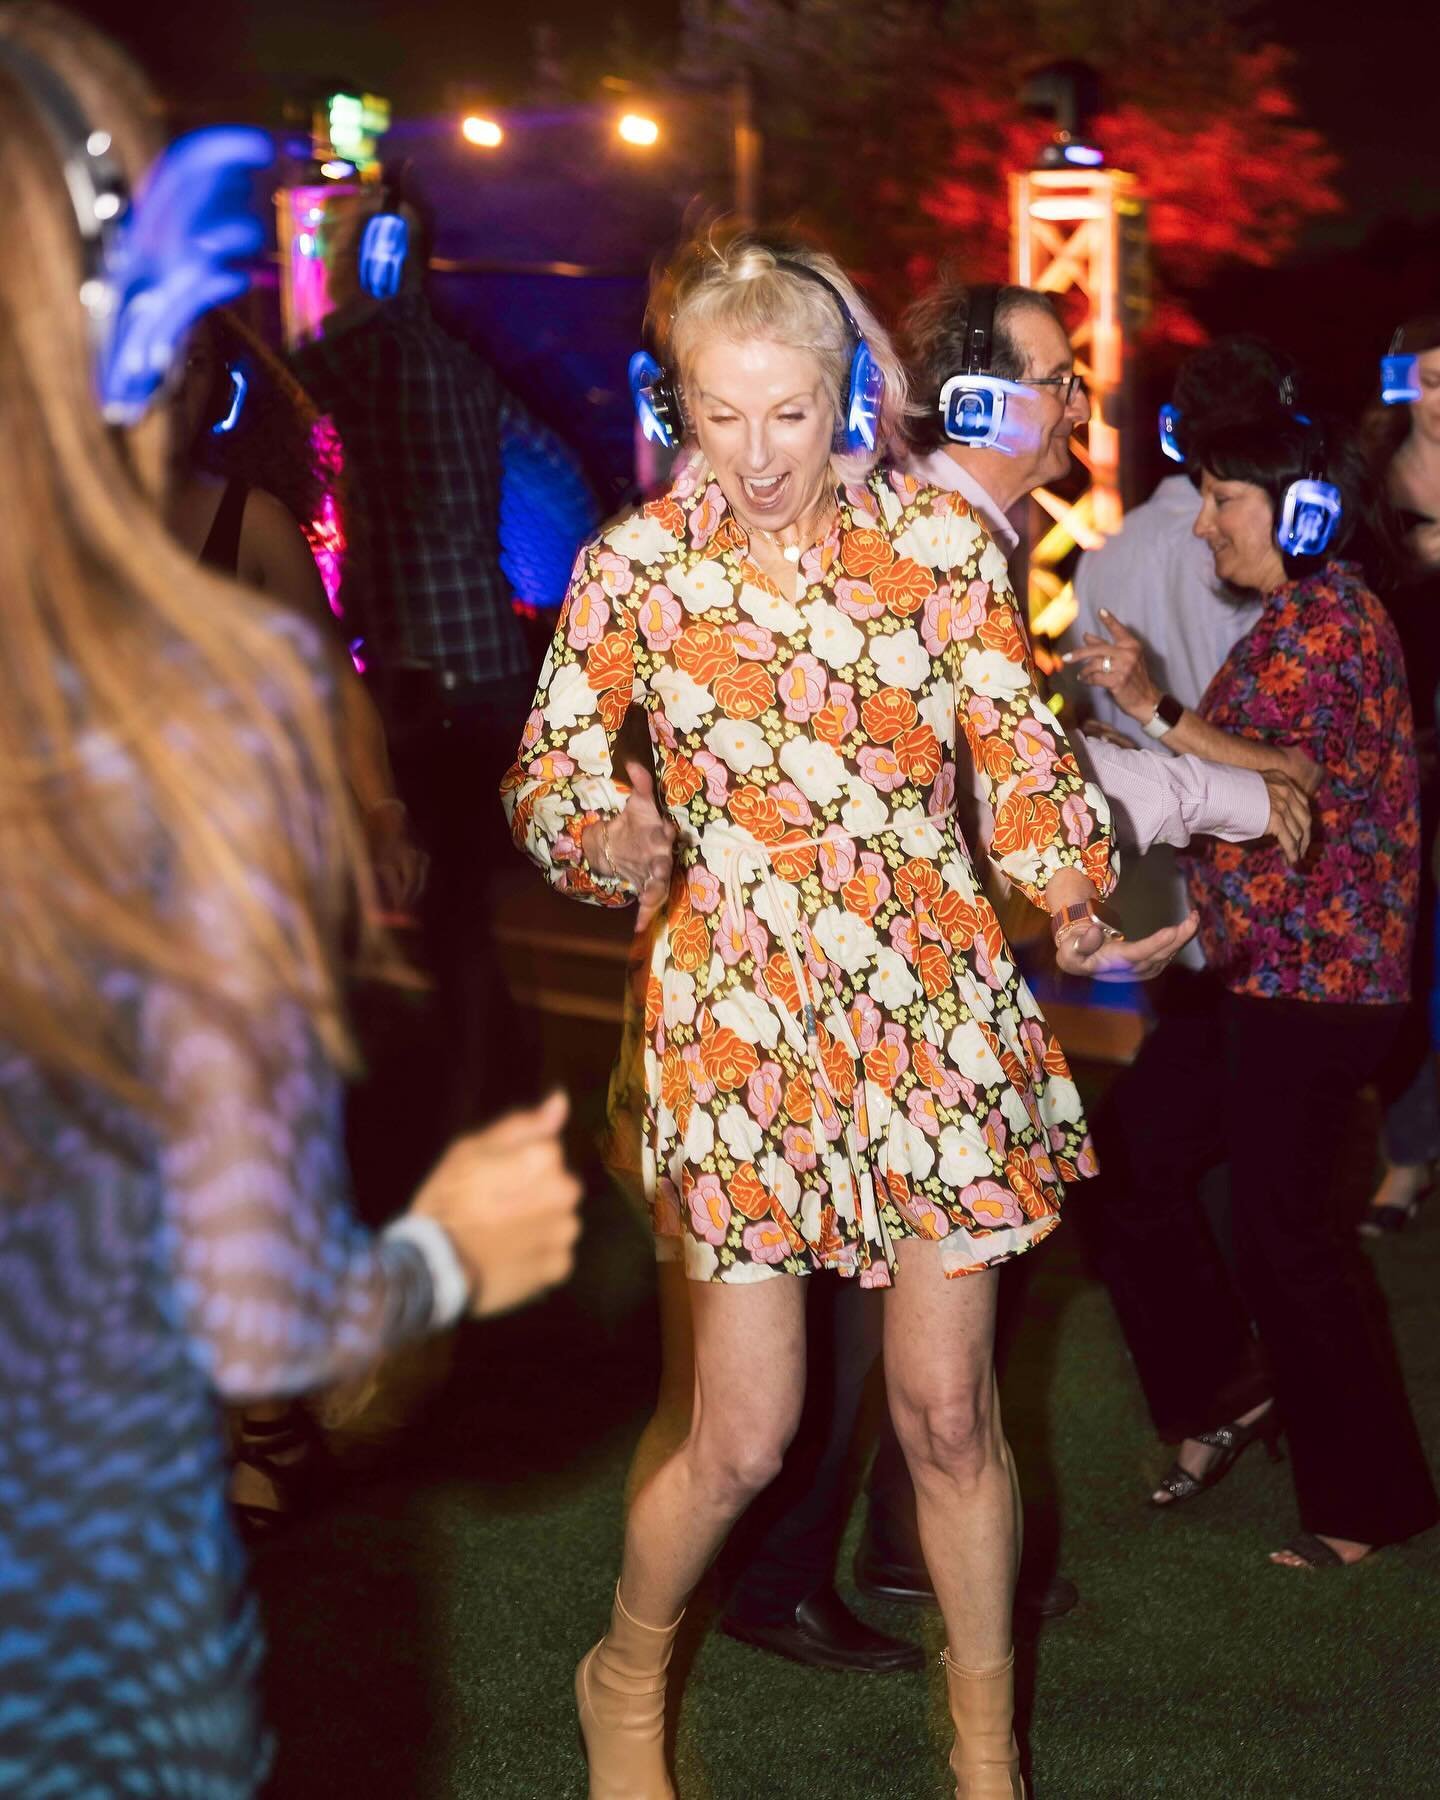 Who says the party needs to be over at 11?  Silent Disco is the way to go!! #atxeventplanner #austineventplanner #atxevents #austinevents #silentdisco